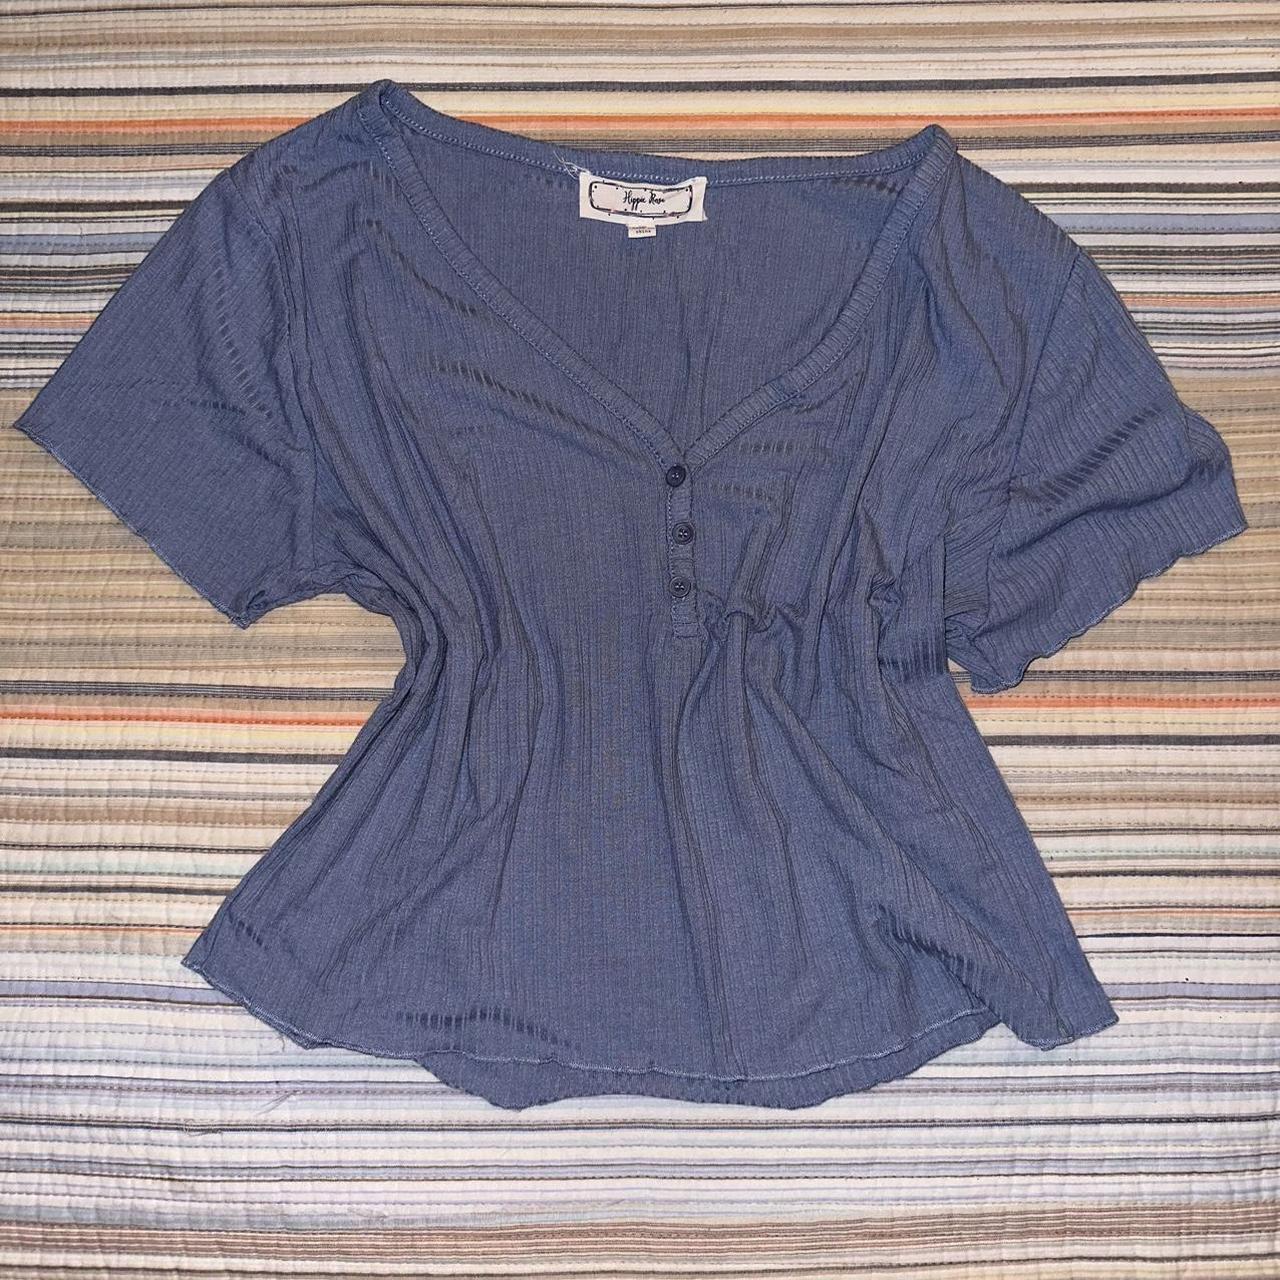 Blue crop top size XL. Buttons can be opened and... - Depop